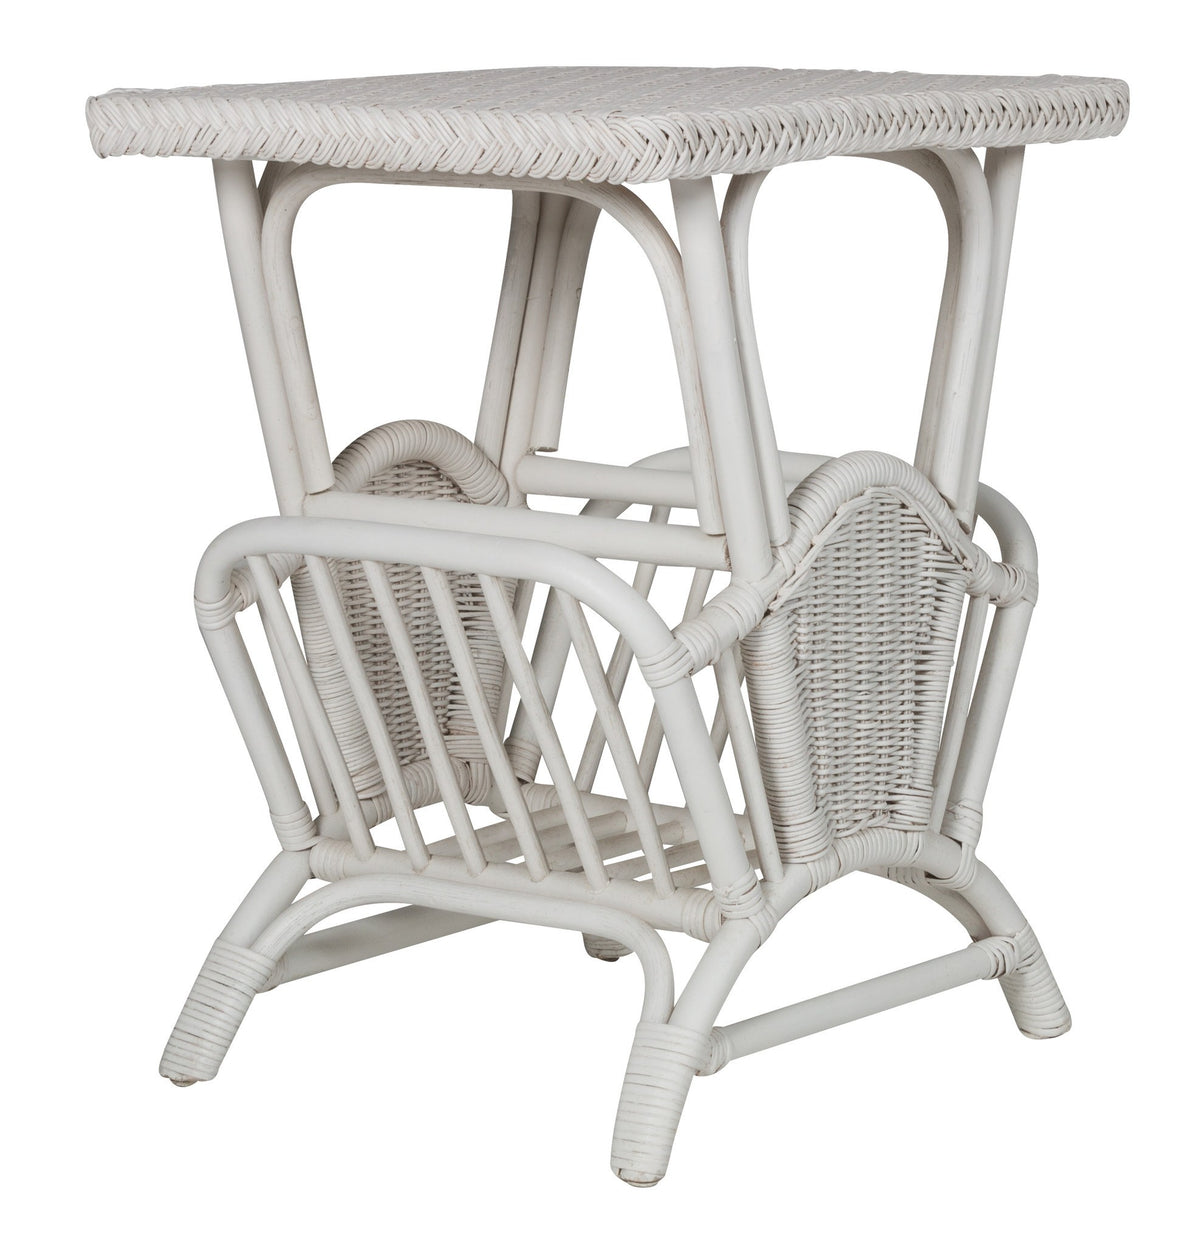 Designer Wicker &amp; Rattan By Tribor Harbor Front Occasional Magazine Table Accessory - Rattan Imports